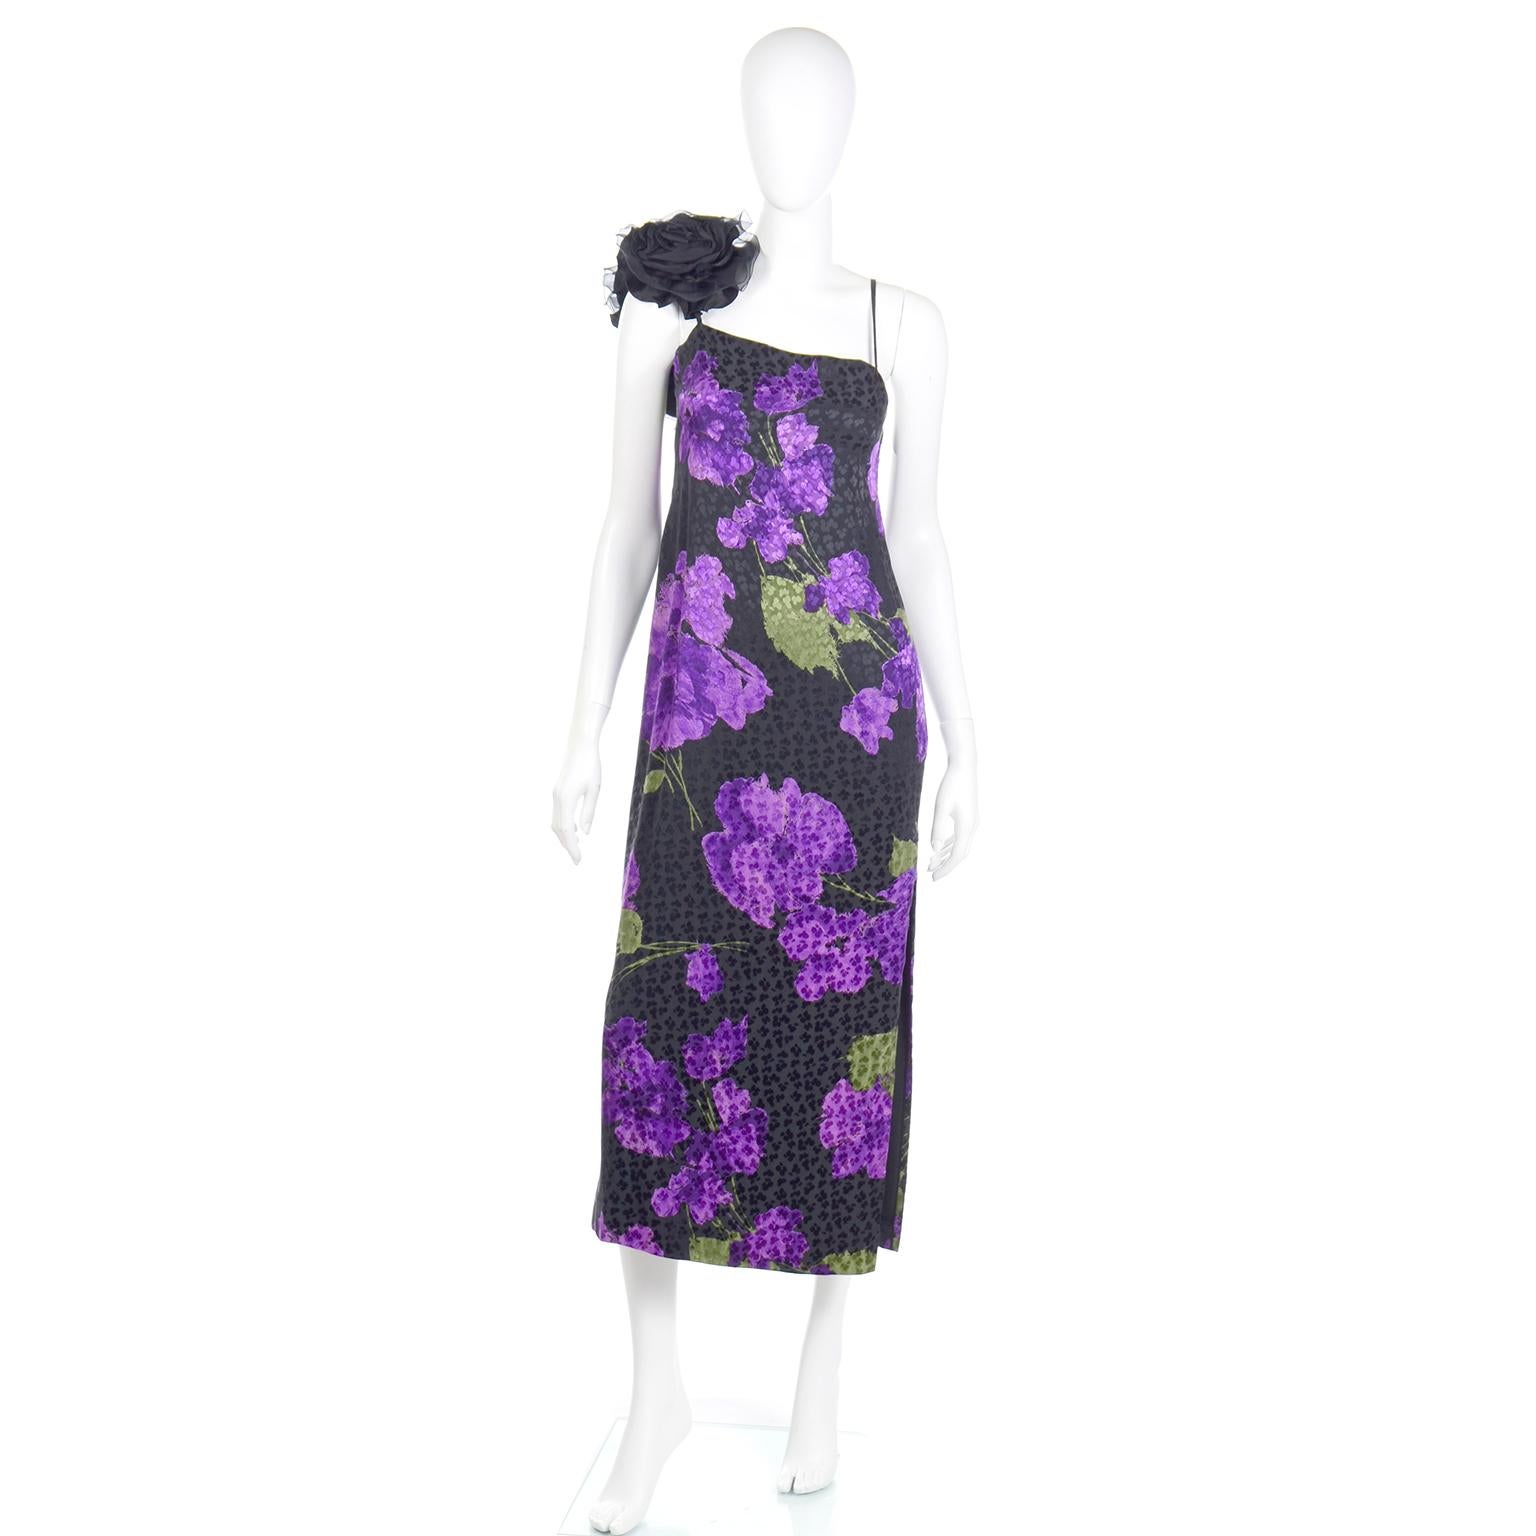 This is a sublime vintage Galanos tonal print deep purple silk dress with purple flowers and green leaves. This gorgeous vintage dress has narrow straps that measure 15